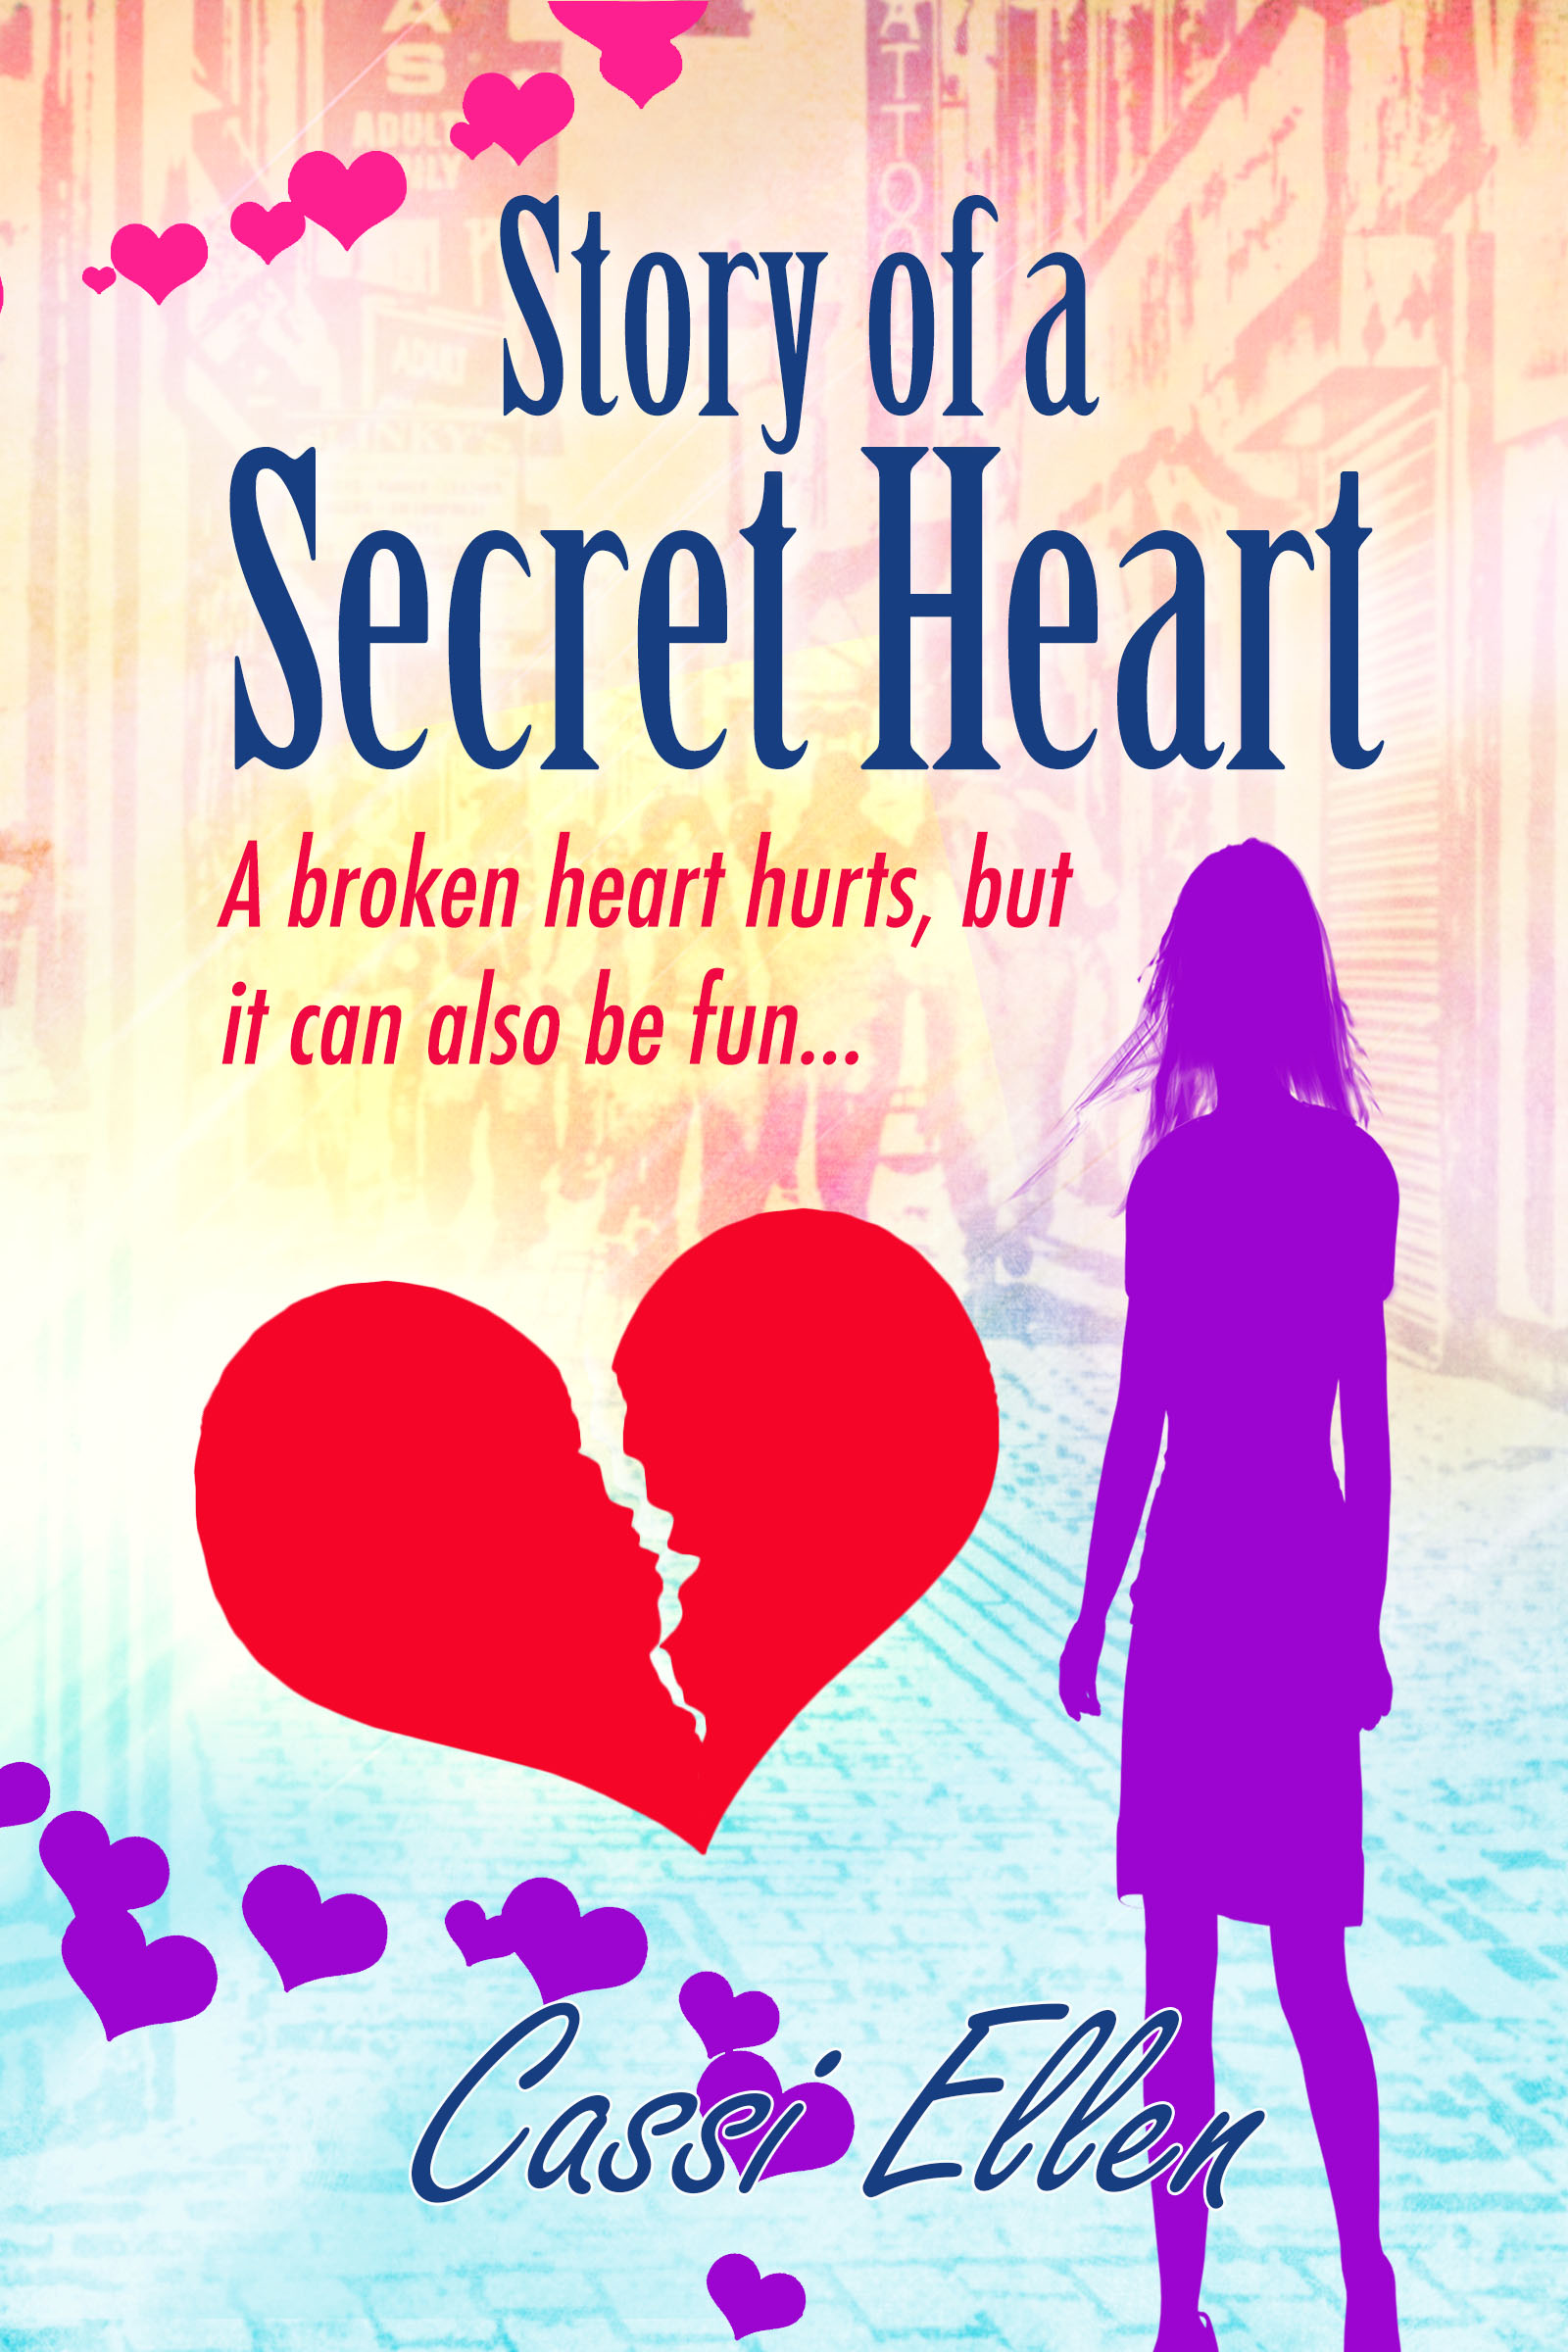 Story of a Secret Heart, chick lit book cover